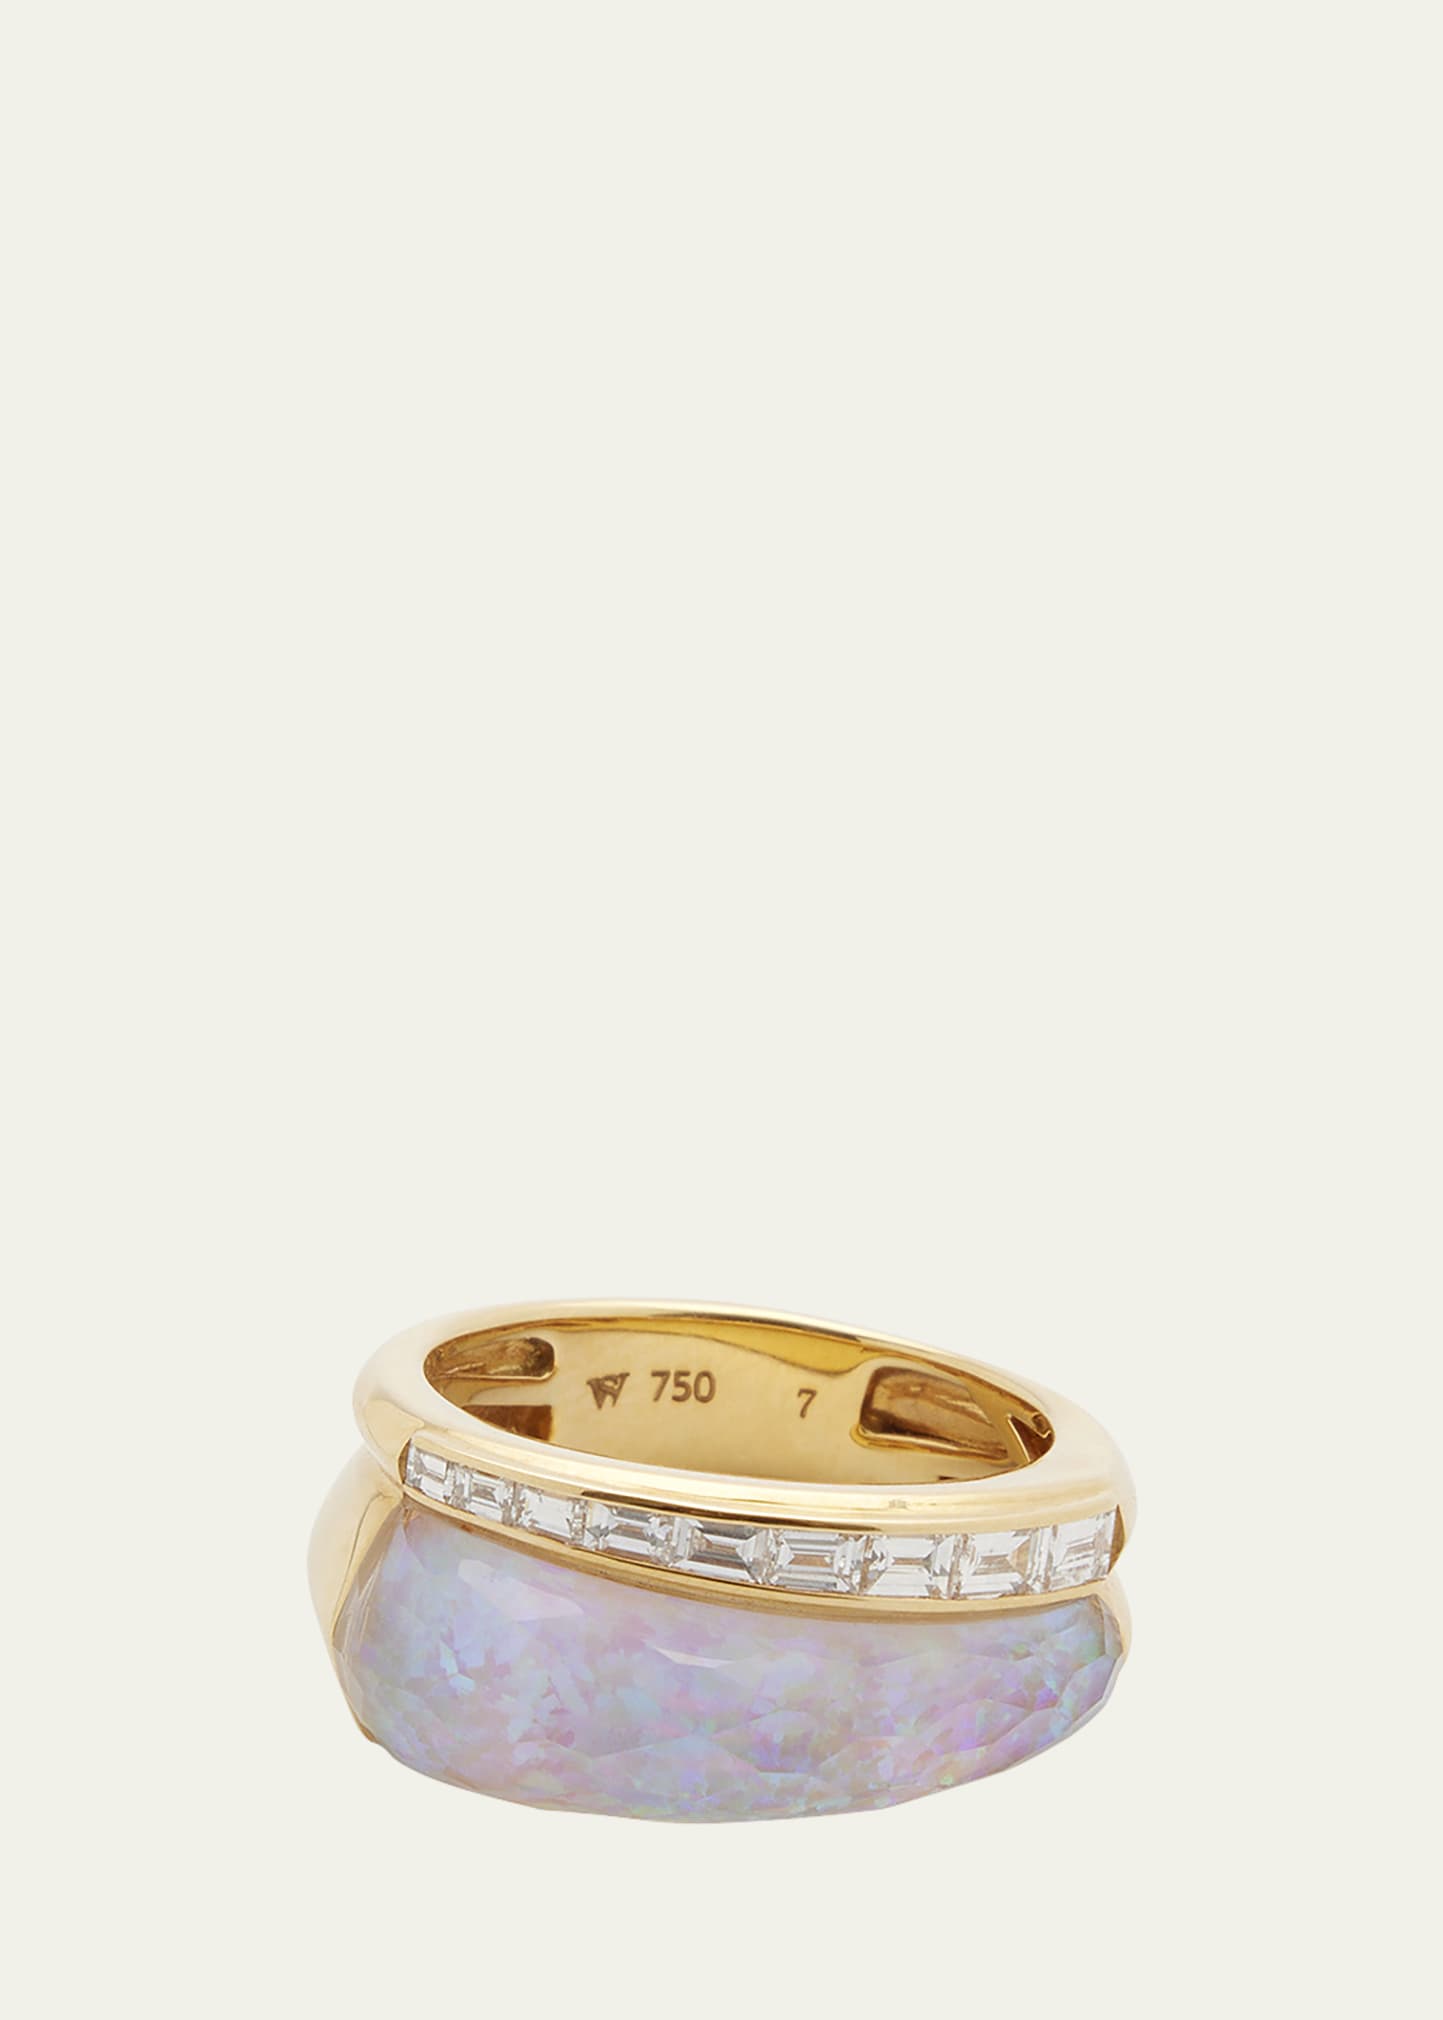 Stephen Webster CH2 Slimline Ring in 18K Yellow Gold with Clear Quartz Crystal Haze